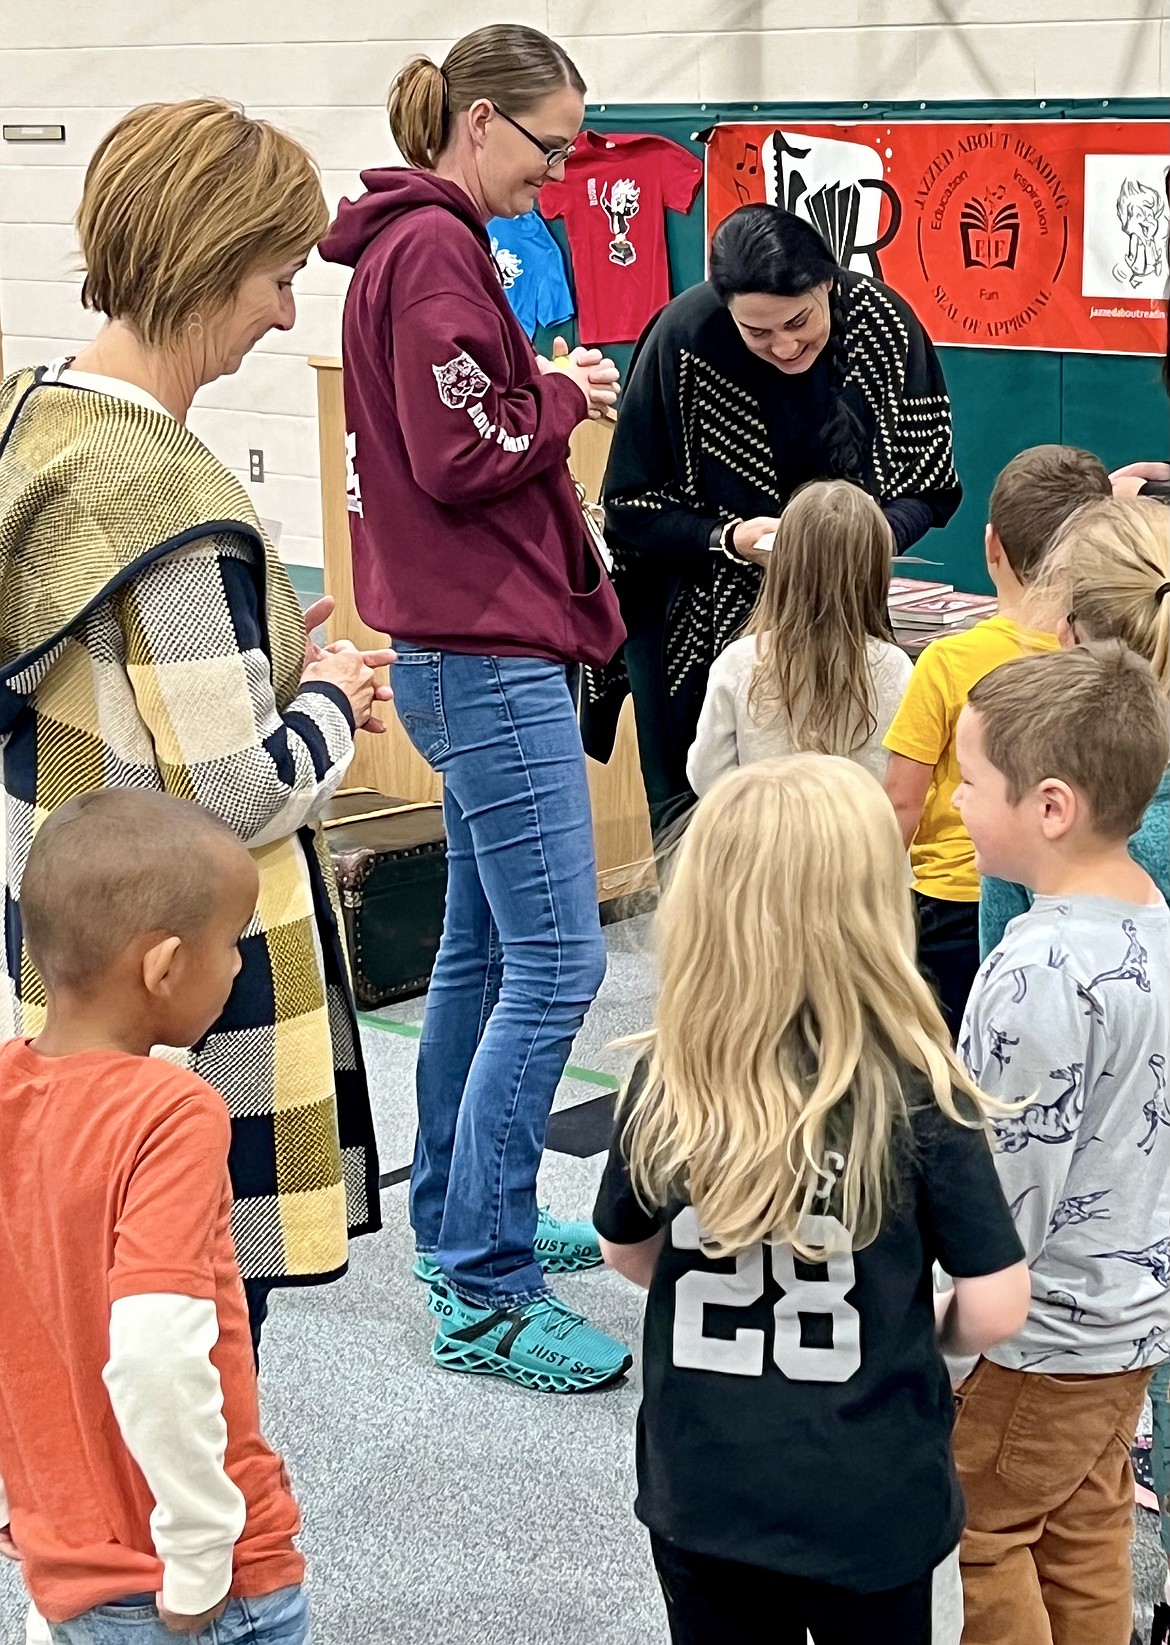 From left, Leslie Bjerke, Allie Anderton and Annie Winston meet with kindergartners at Betty Kiefer Elementary School in Rathdrum on Thursday for a reading rally through Jazzed About Reading, a service organization and non-profit reading incentive program started in 2018 by Winston. Winston, a local children's author, signs her book, “Daniel Boone and the Battle of Boonesborough: Admiral Wright’s Heroical Storicals." Photo courtesy of Annie Winston